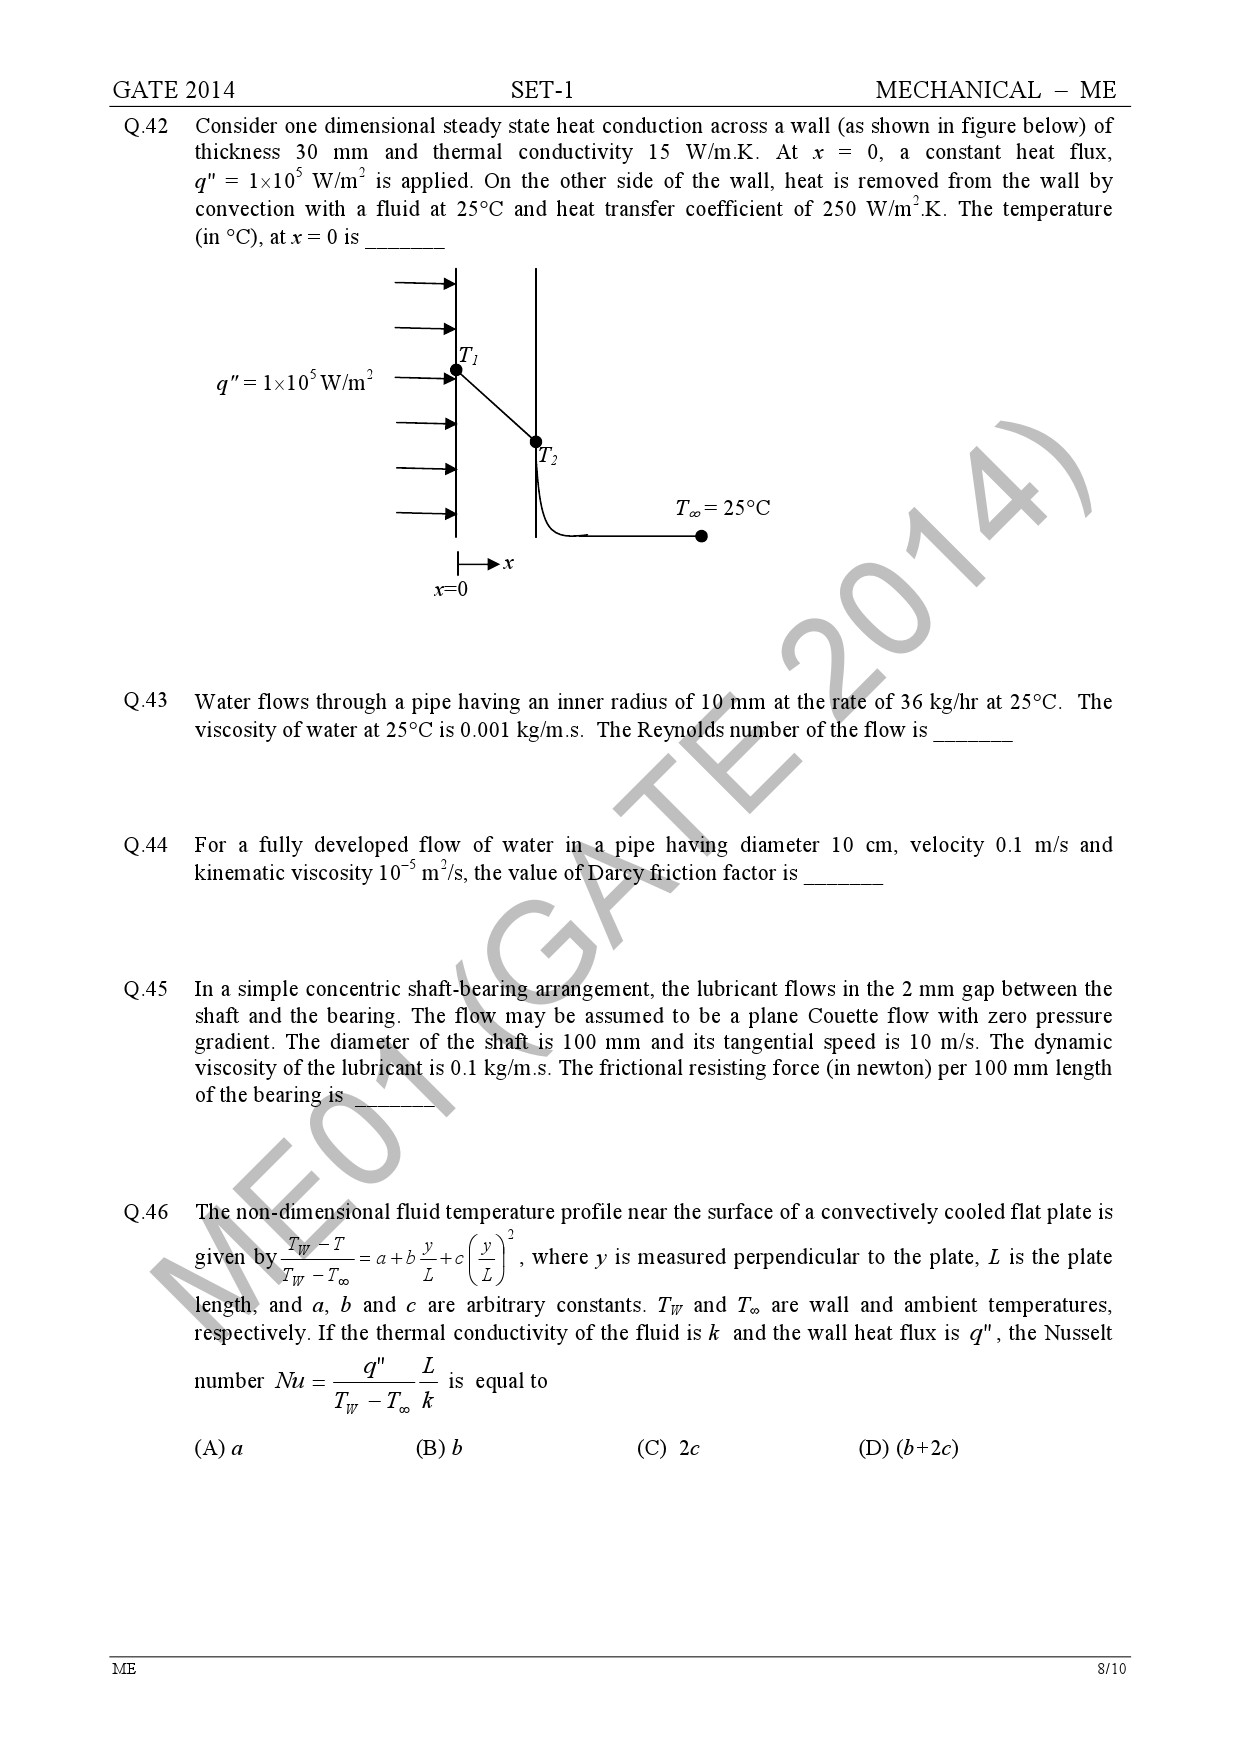 GATE Exam Question Paper 2014 Mechanical Engineering Set 1 14